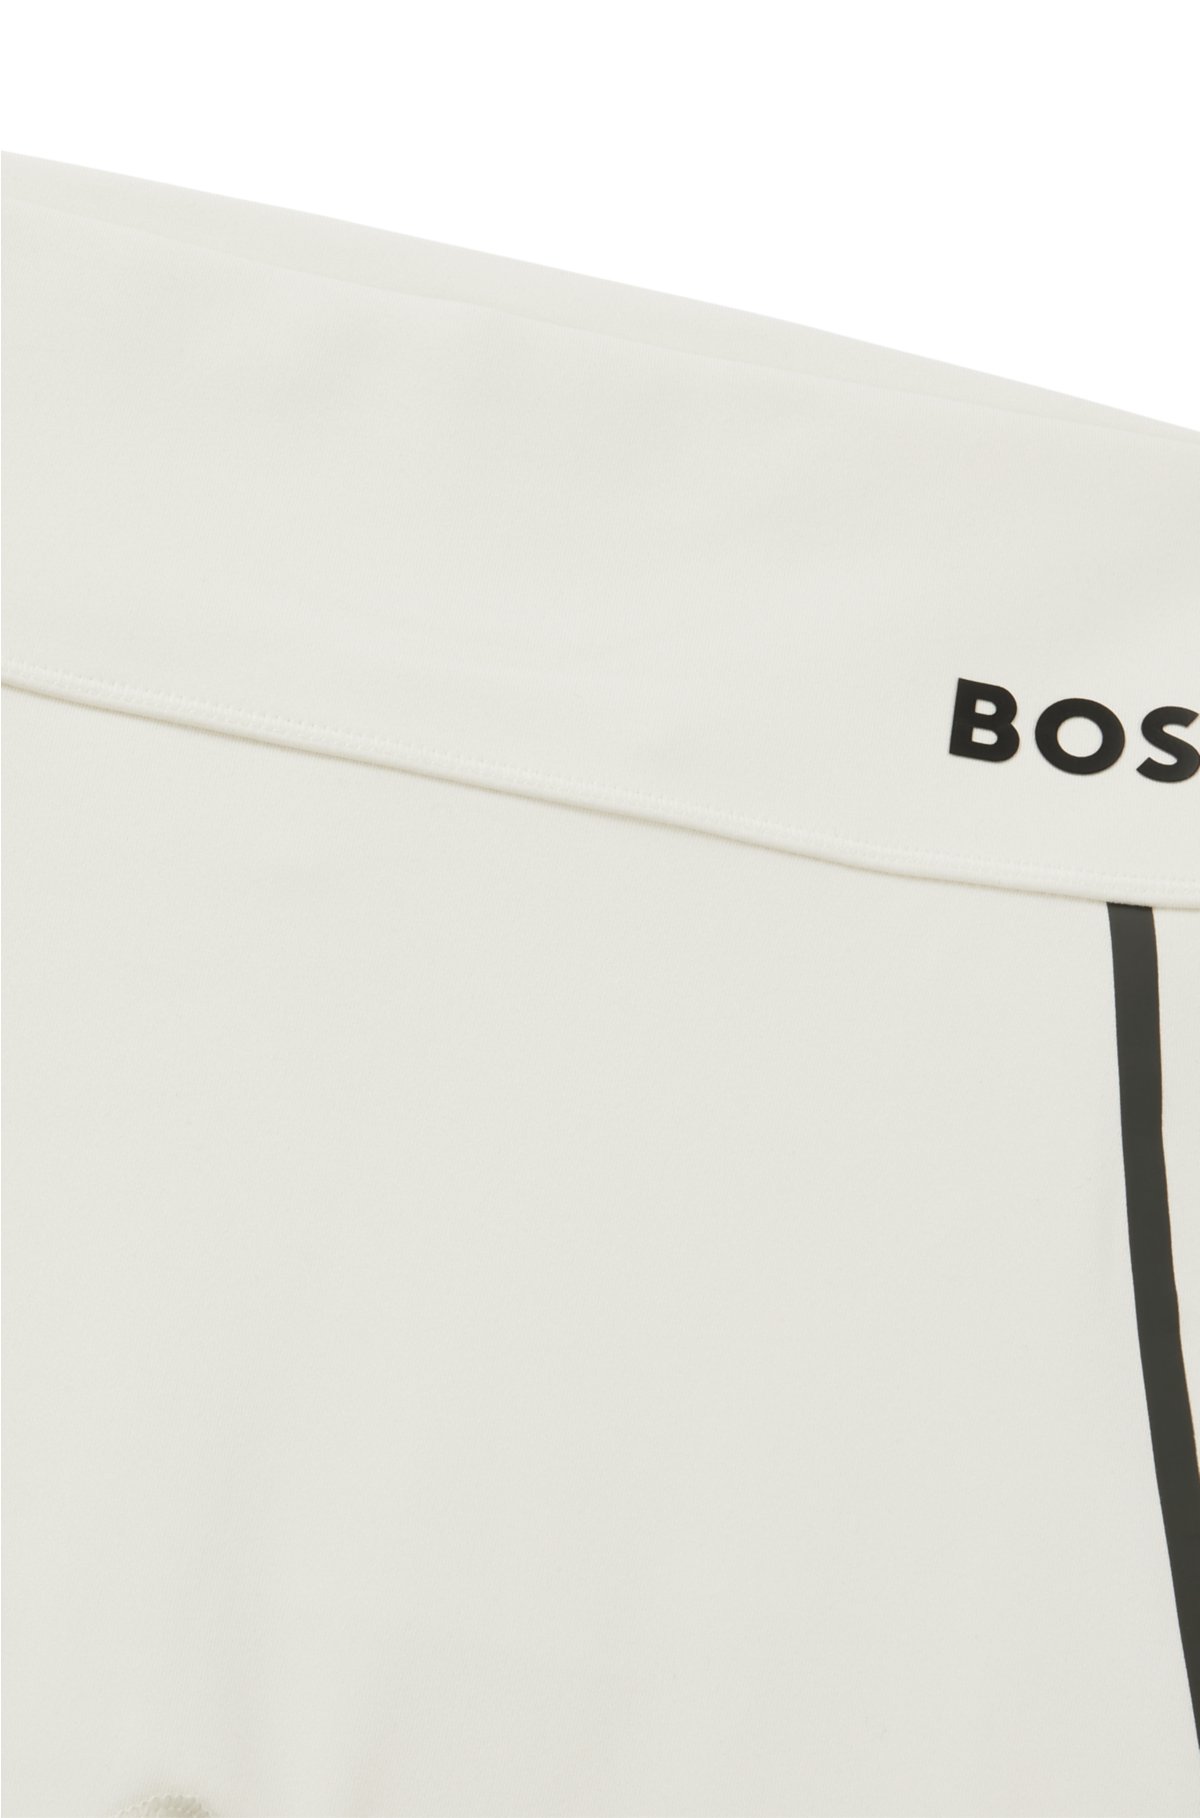 BOSS - Slim-fit leggings with side stripes and logo detail